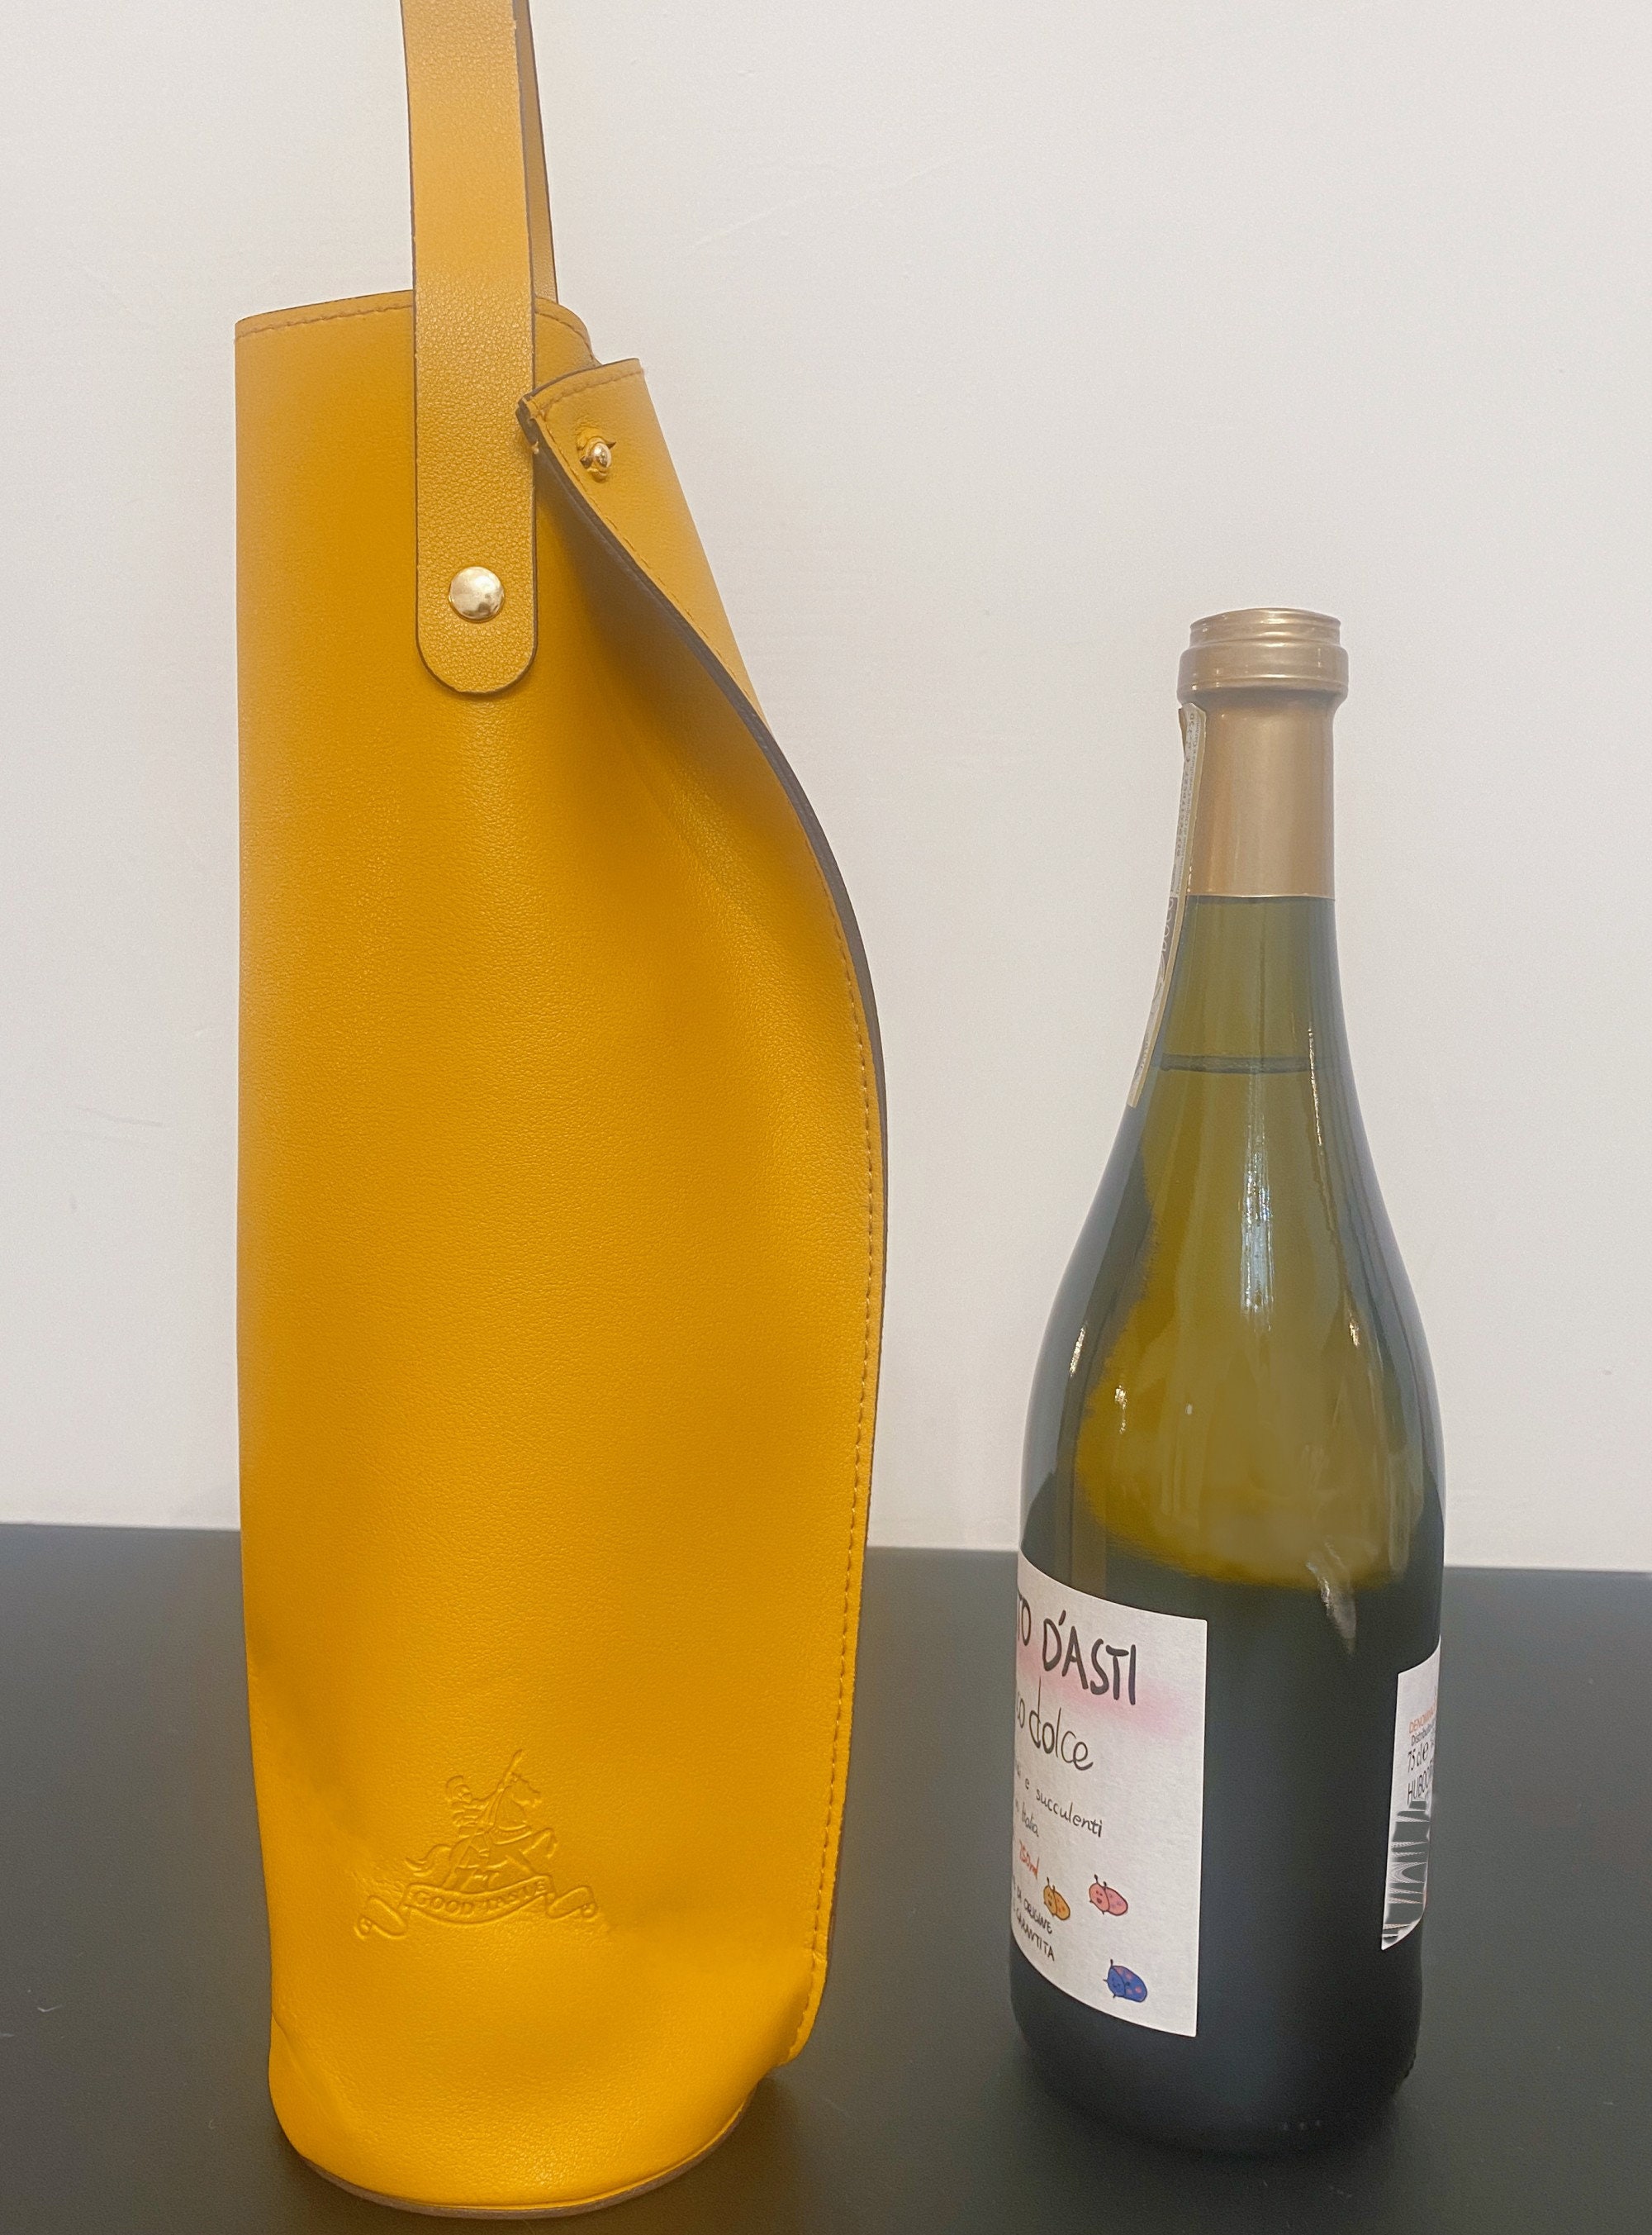 V Ring Tote Wine - Corîu - Leather Bags